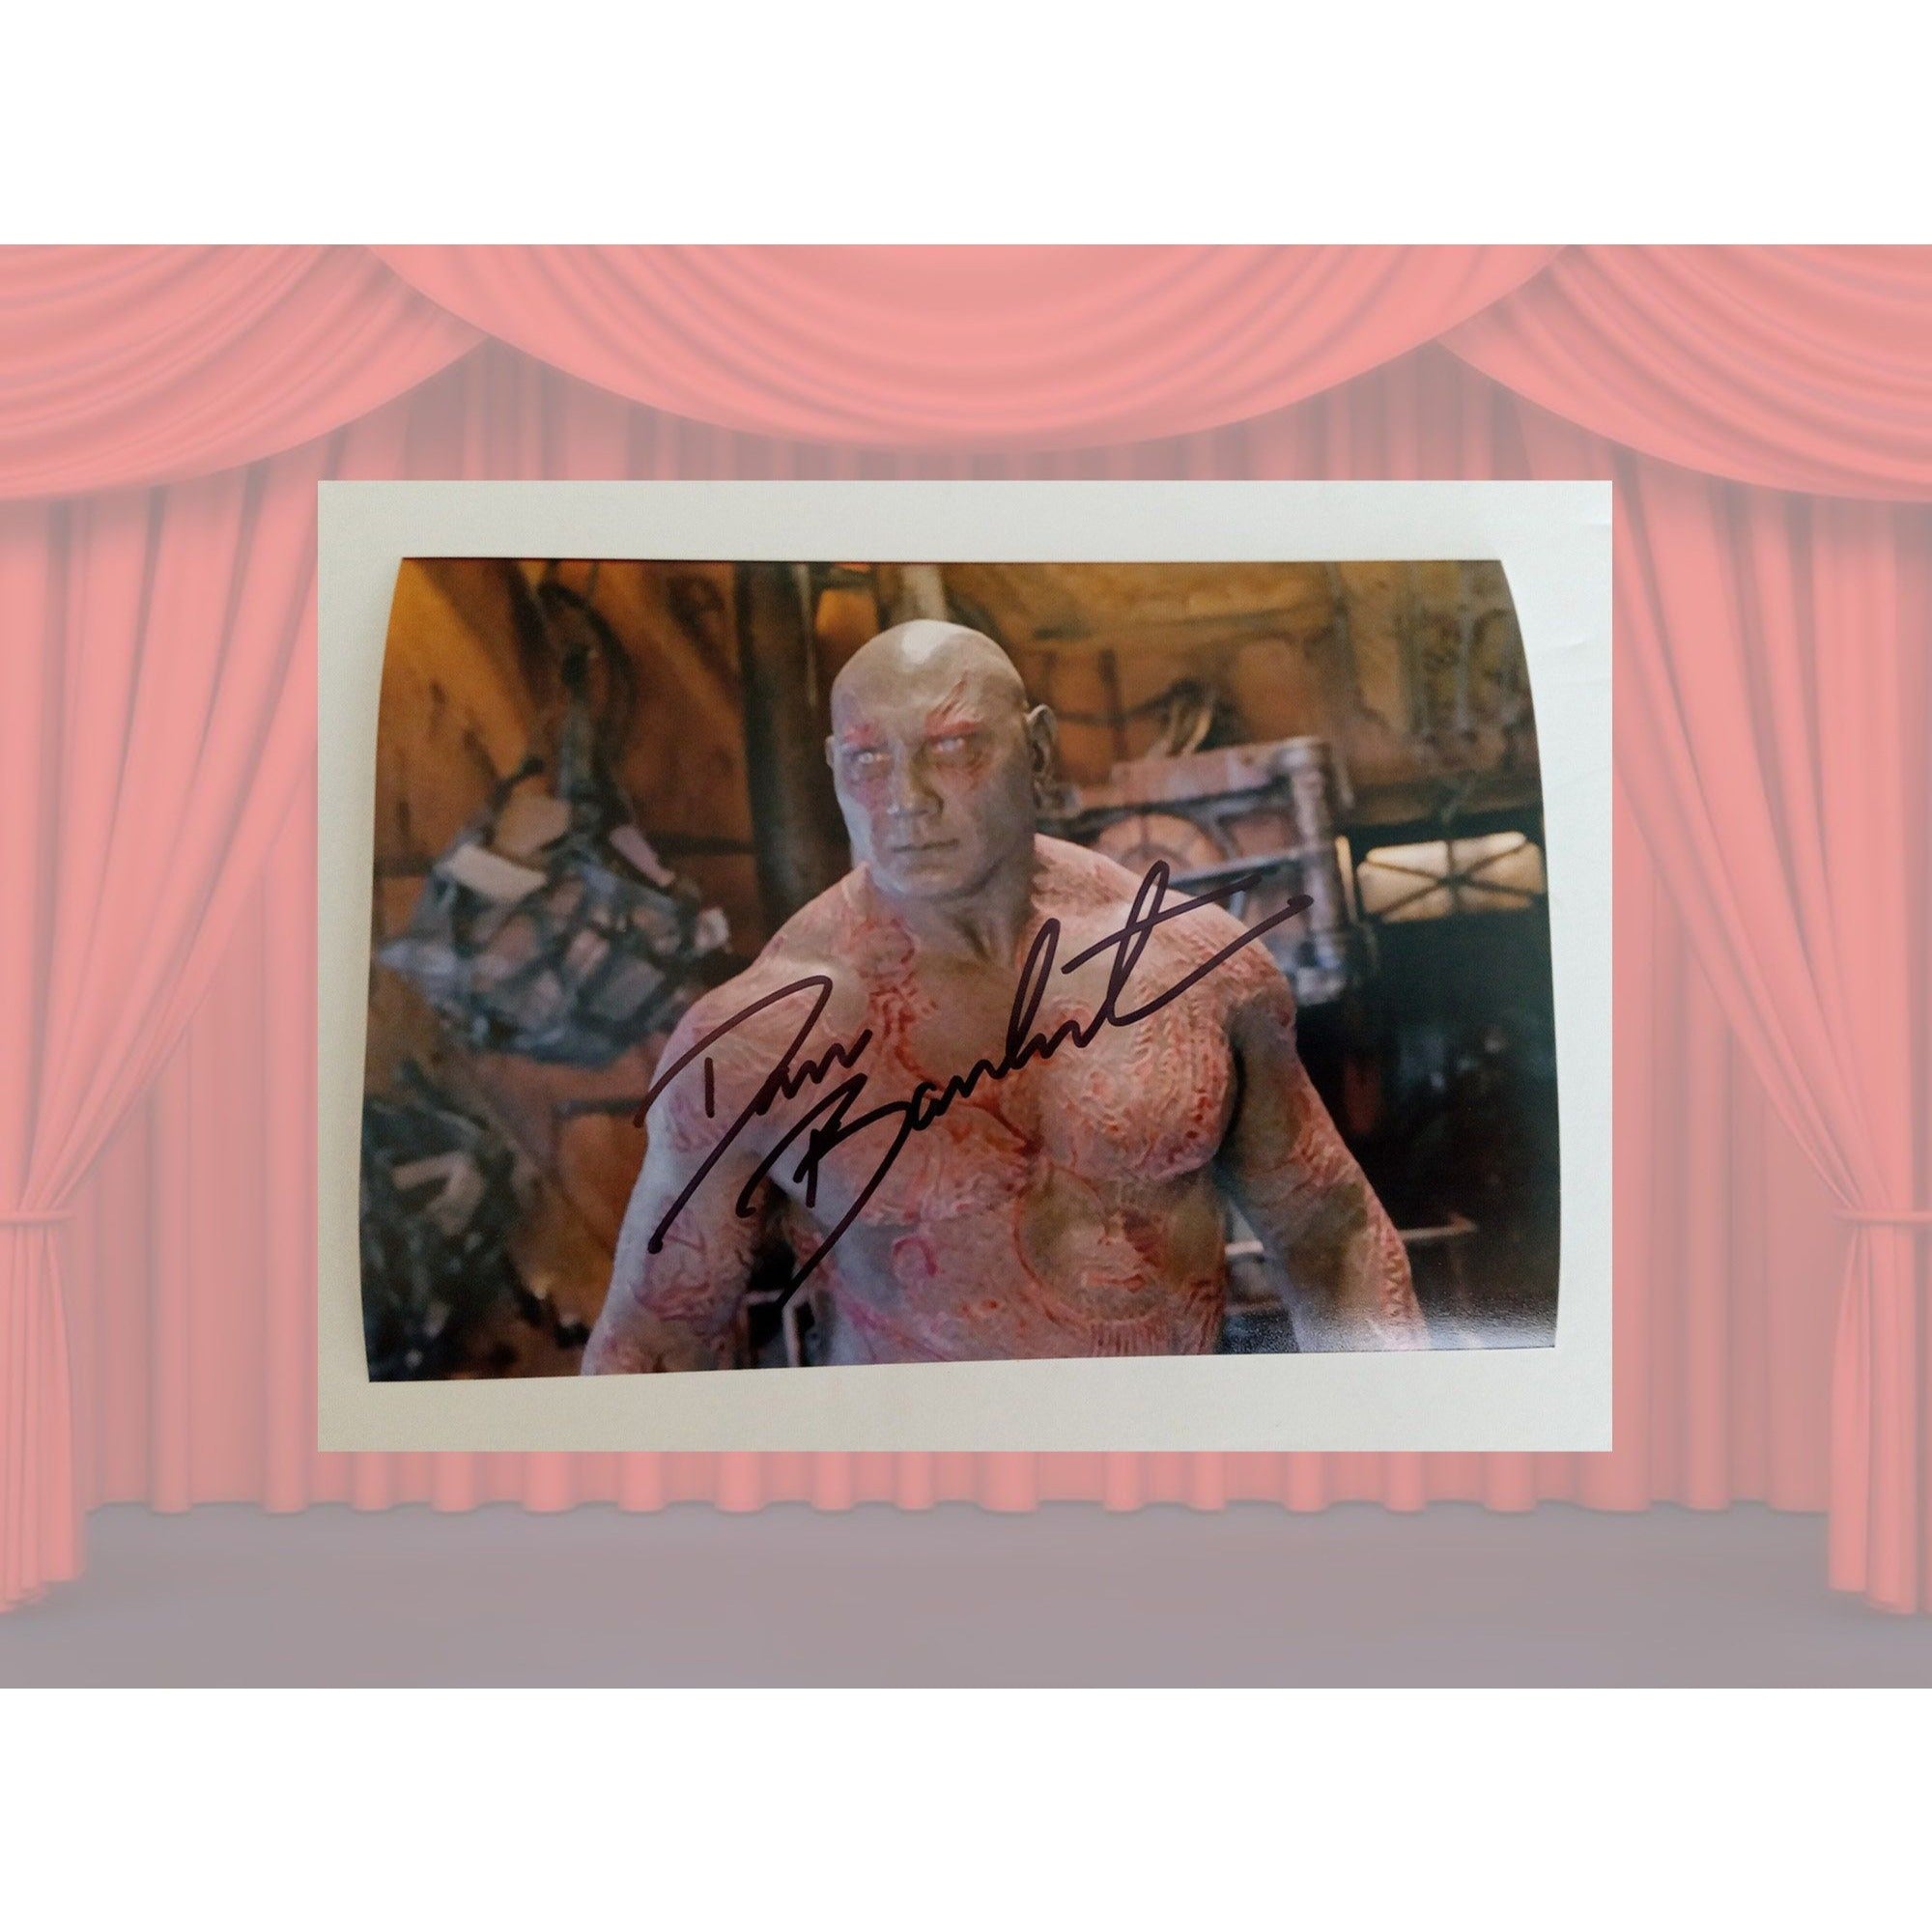 Dave Bautista Drax the Destroyer Guardians of the Galaxy 5 x 7 photo signed with proof